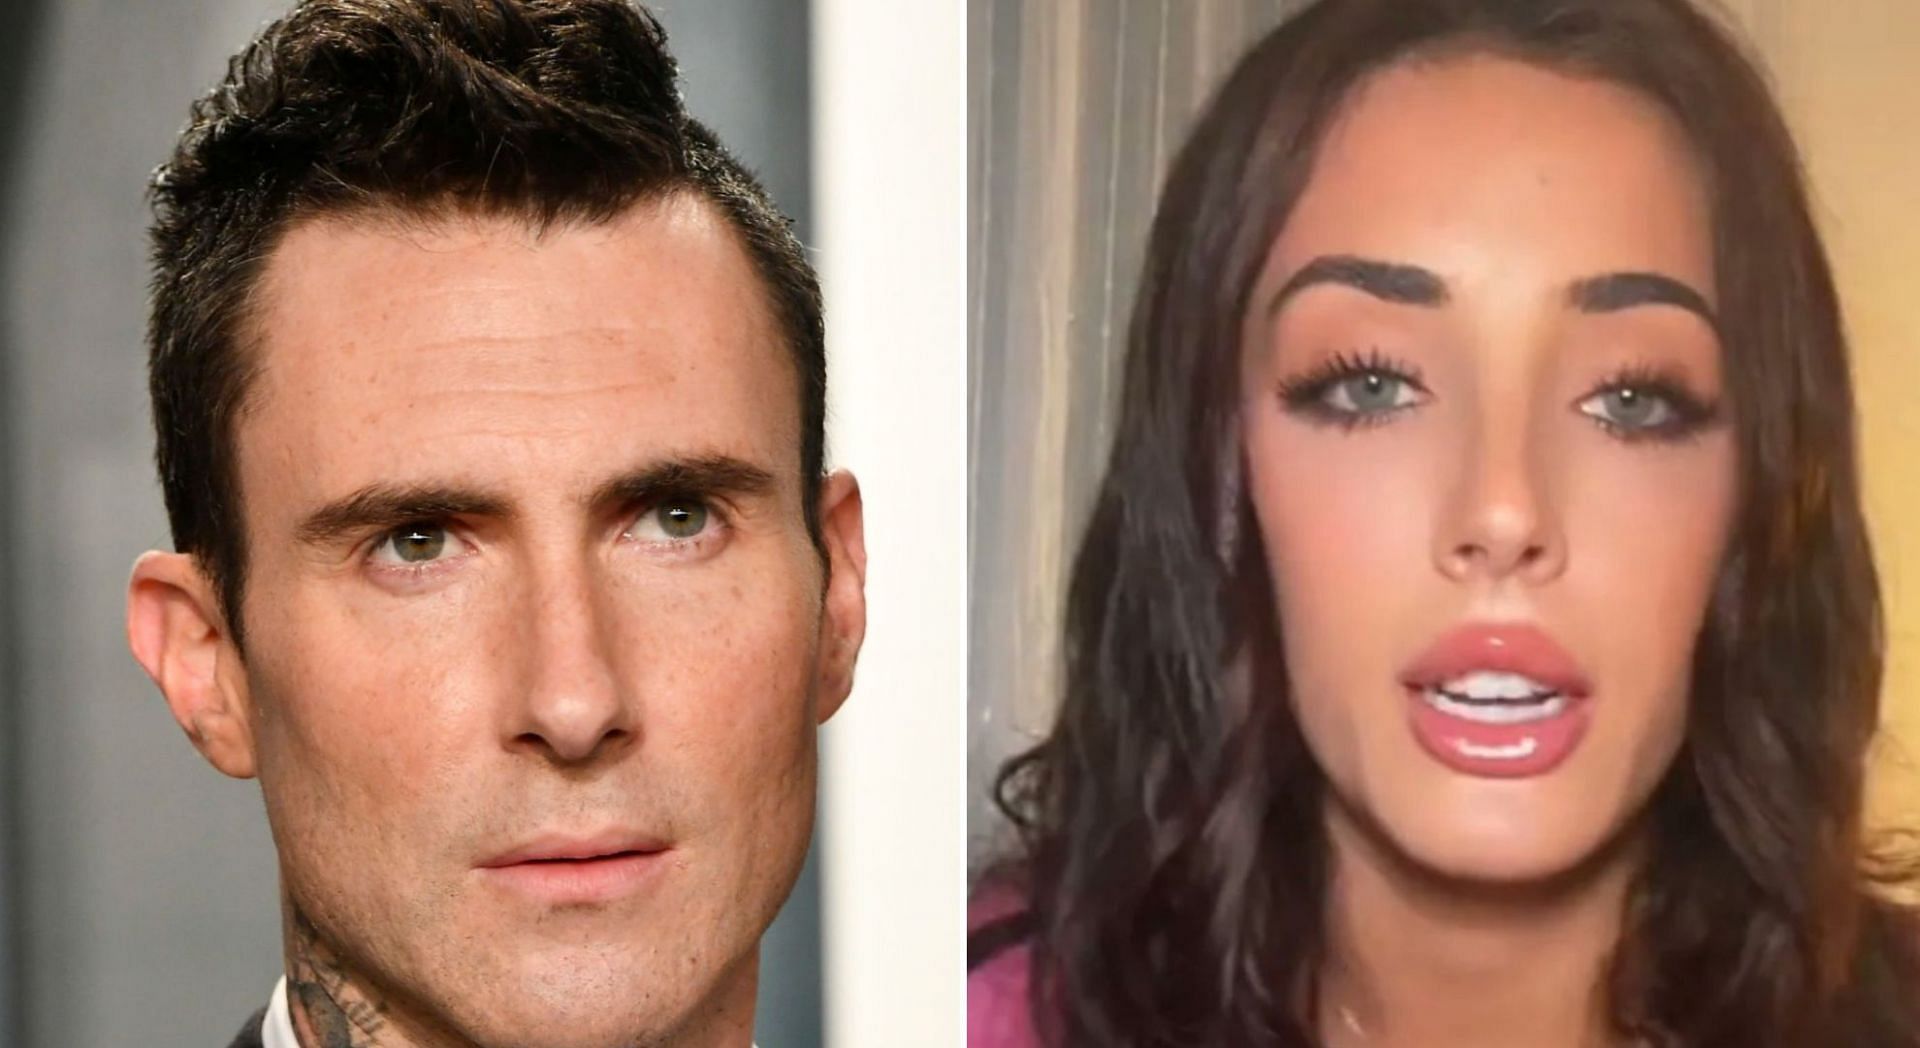 Model Sumner Stroh has alleged that she reportedly had an affair with Adam Levine (Image via Getty Images and TikTok/Sumner Stroh)